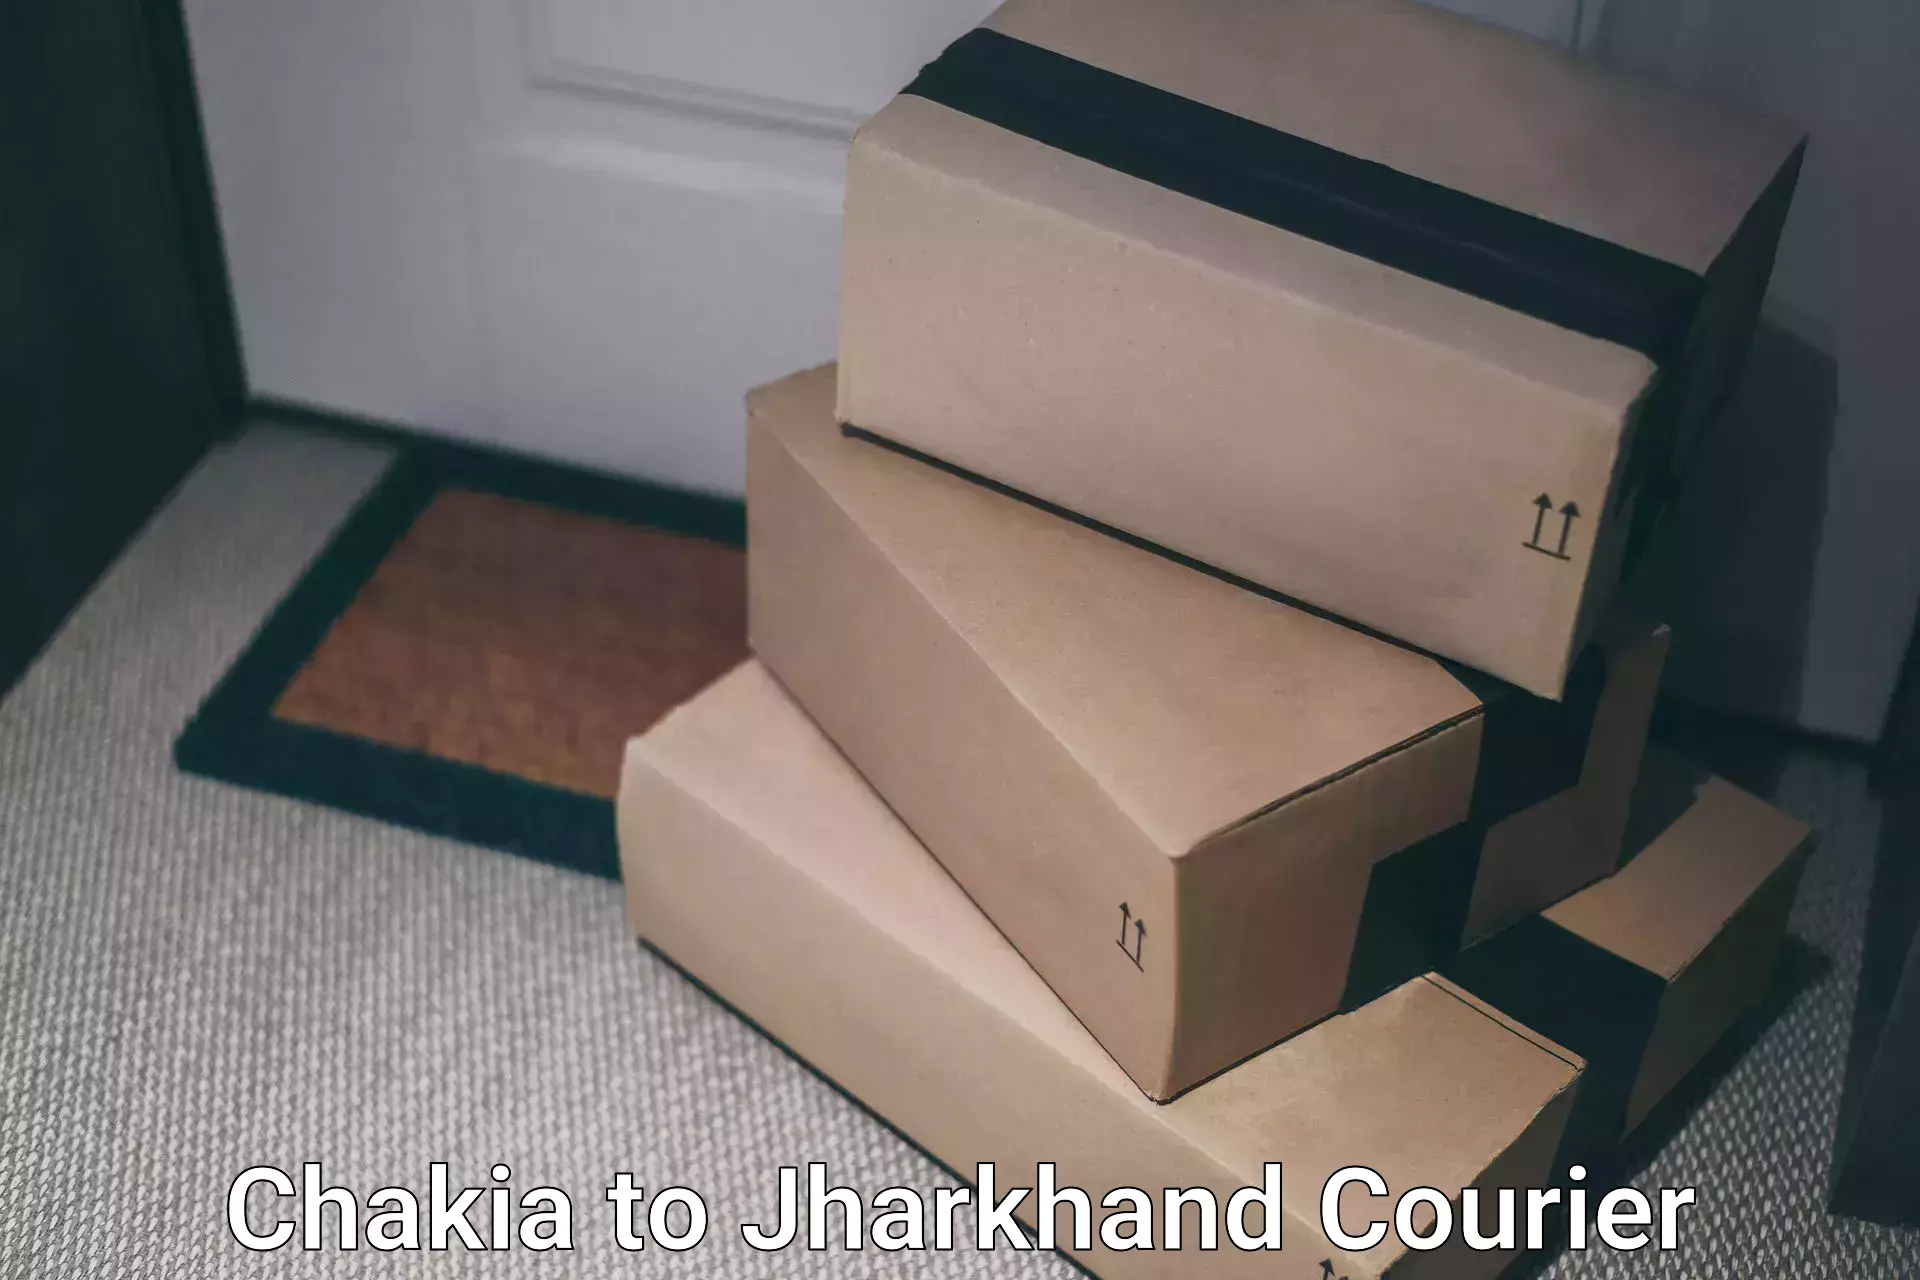 Doorstep delivery service Chakia to Jharkhand